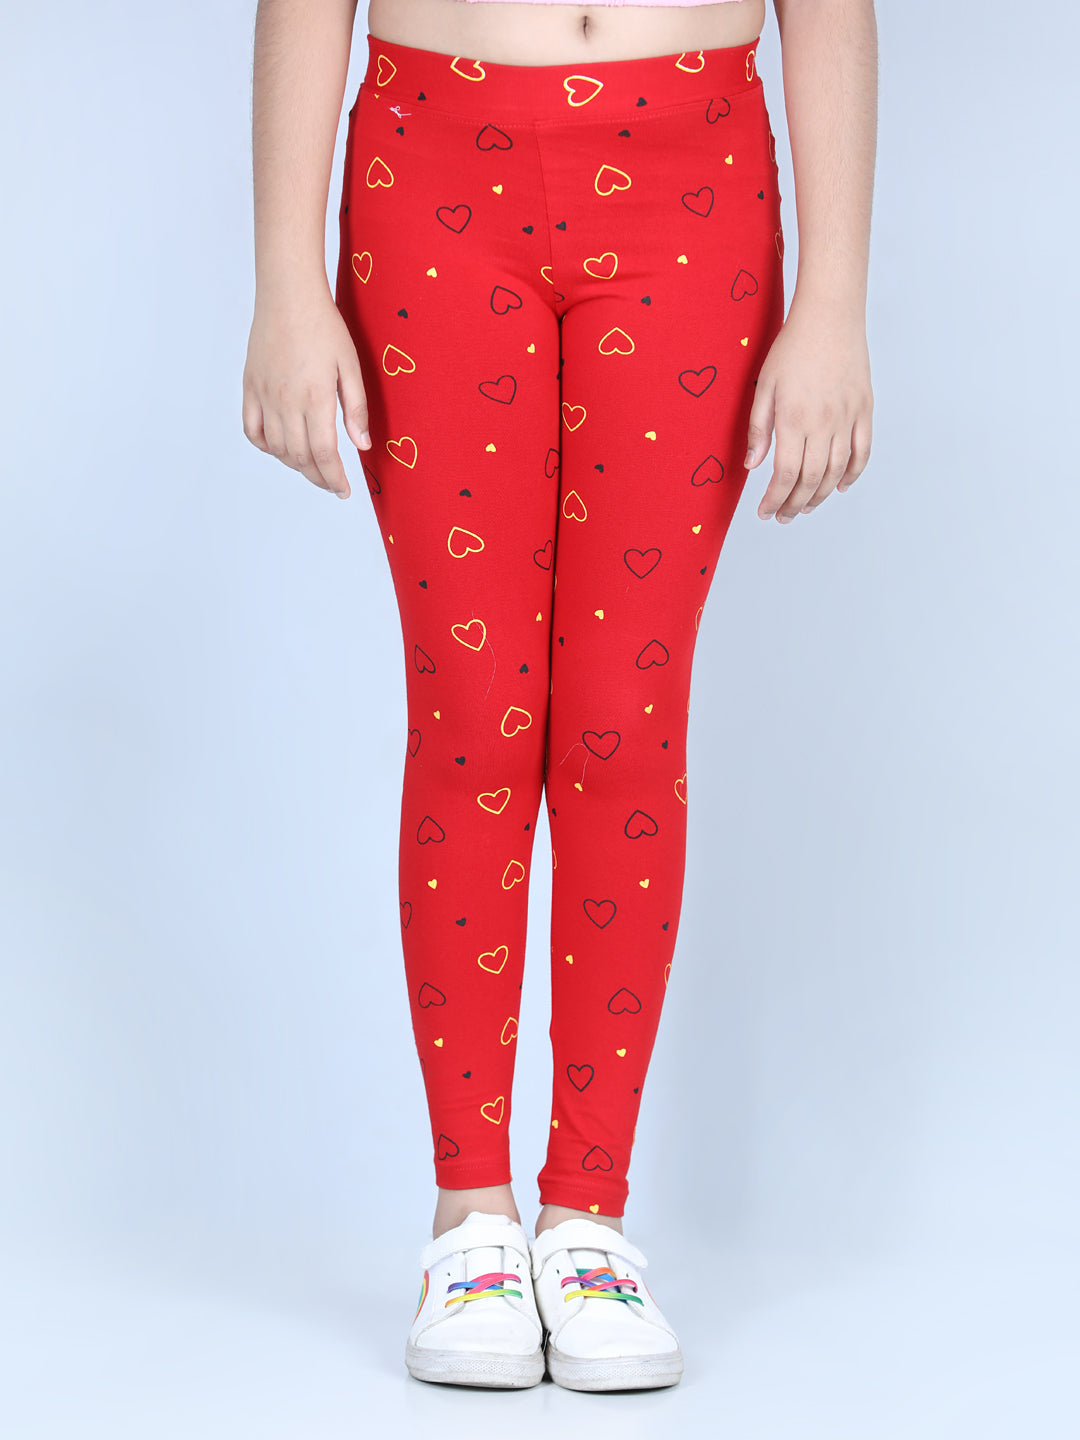 Girls Heart Printed Leggings with Flat Waistband- Red